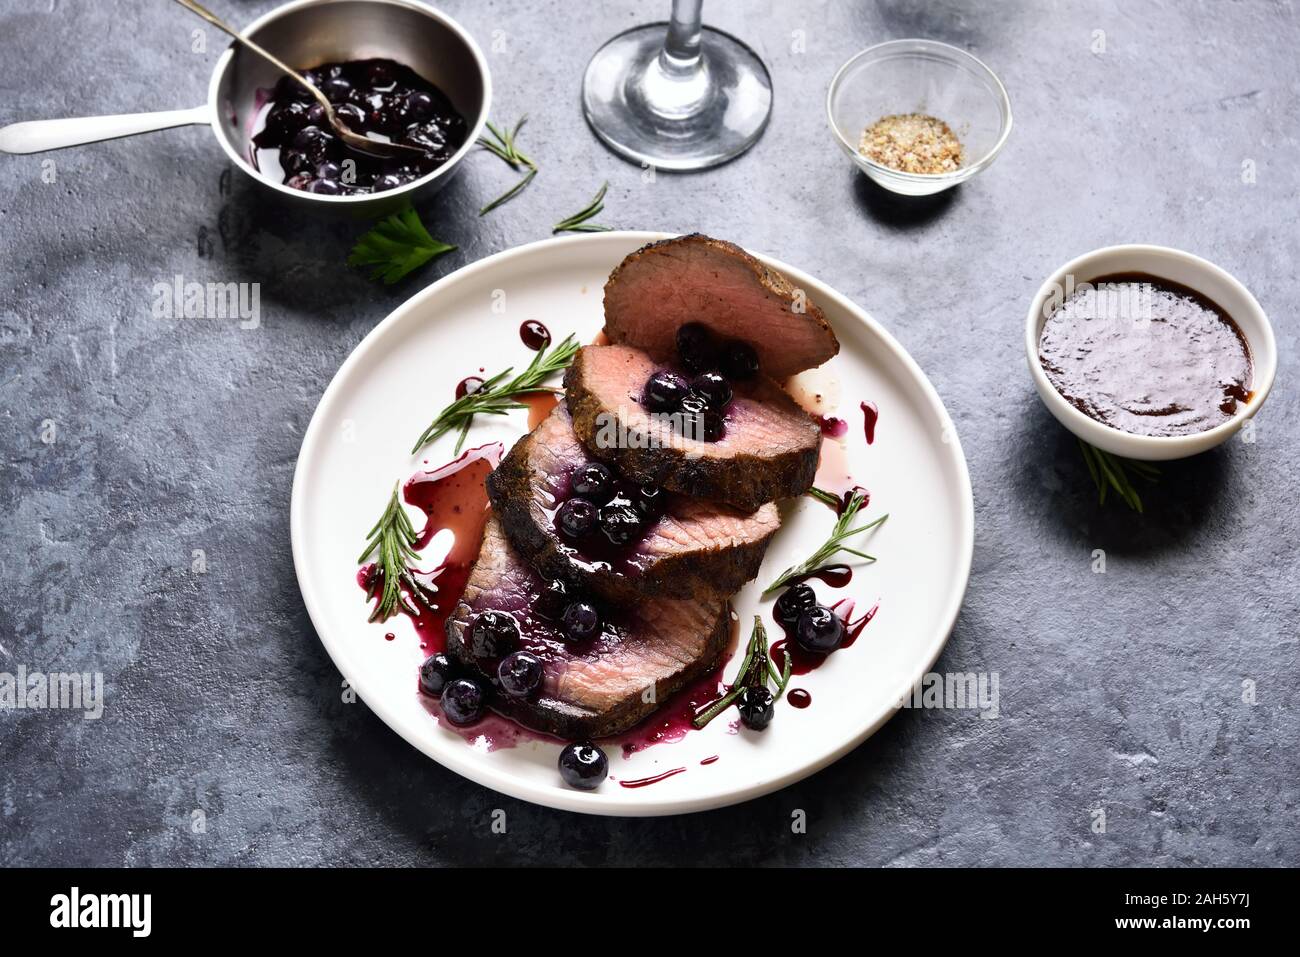 Sliced grilled beef with blueberry sauce on white plate over dark stone background. Tasty medium rare roast beef with berry sauce. Stock Photo